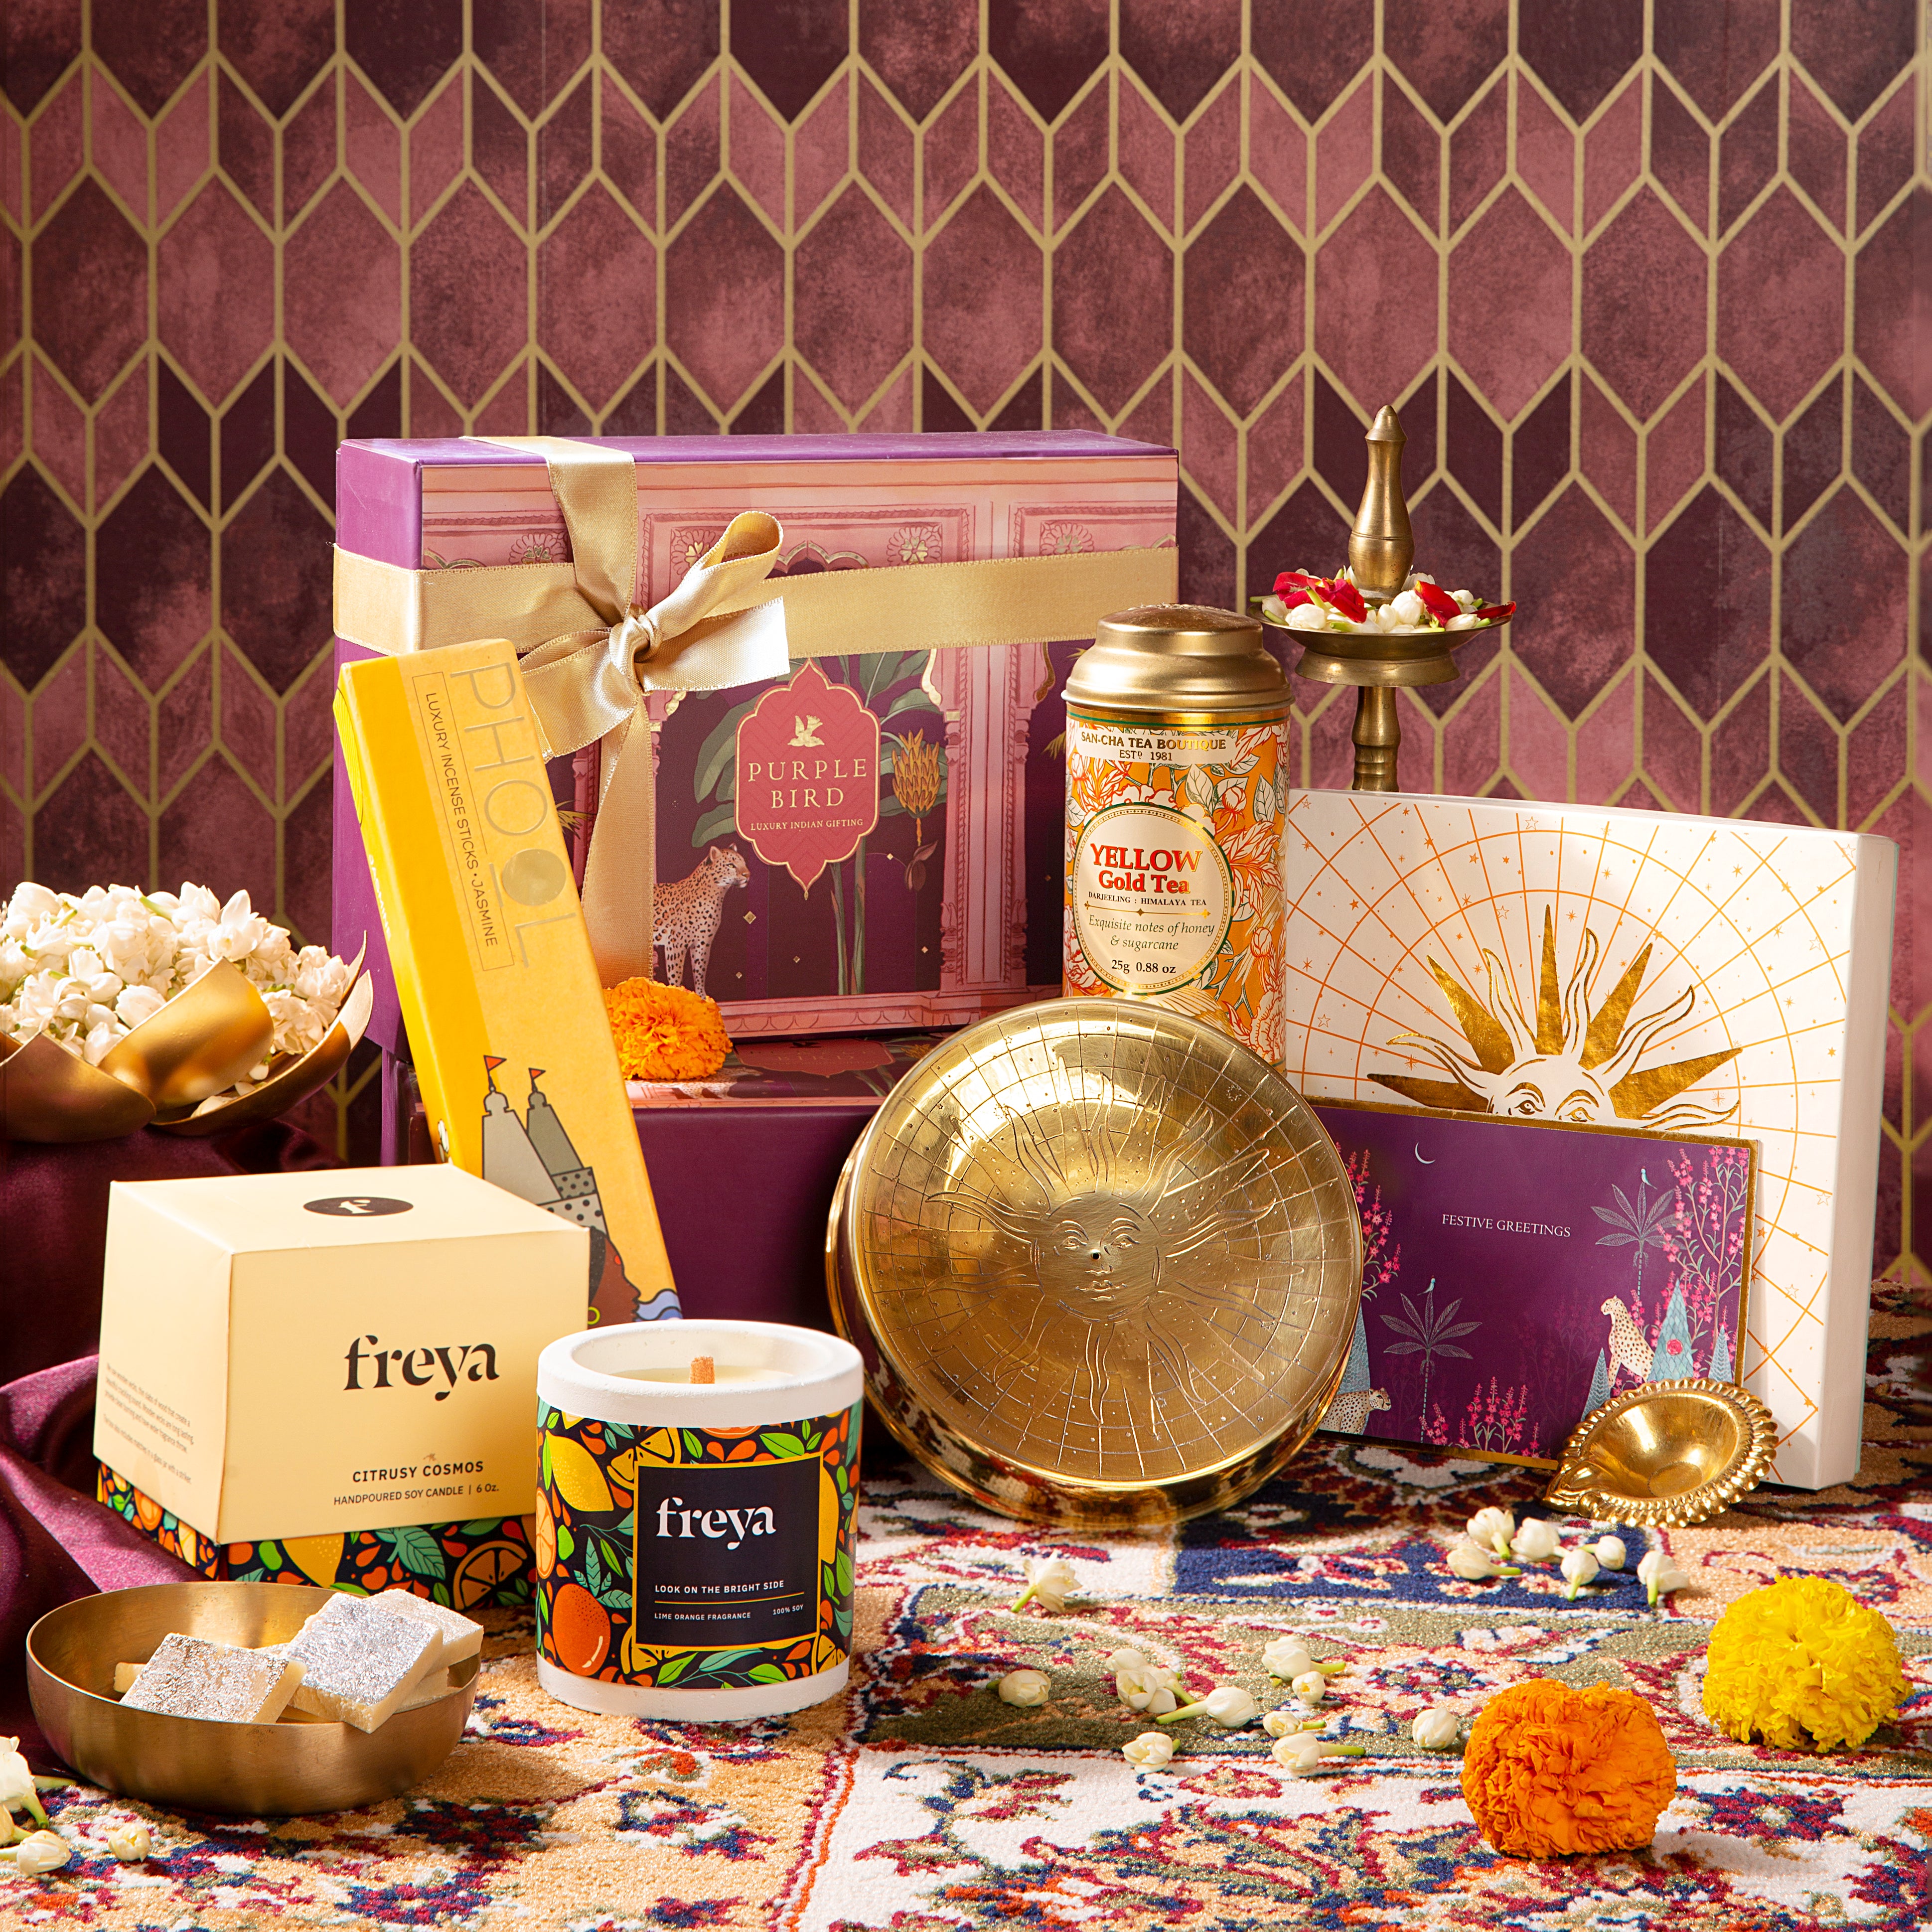 Buy ZOROY LUXURY CHOCOLATE Diwali Gift Pack | Double decker Diwali Festive  gift of candle holder and assorted goodies | Online Chocolate Gifts Combo |  Deepavali Chocolate For Gifting Online at Best